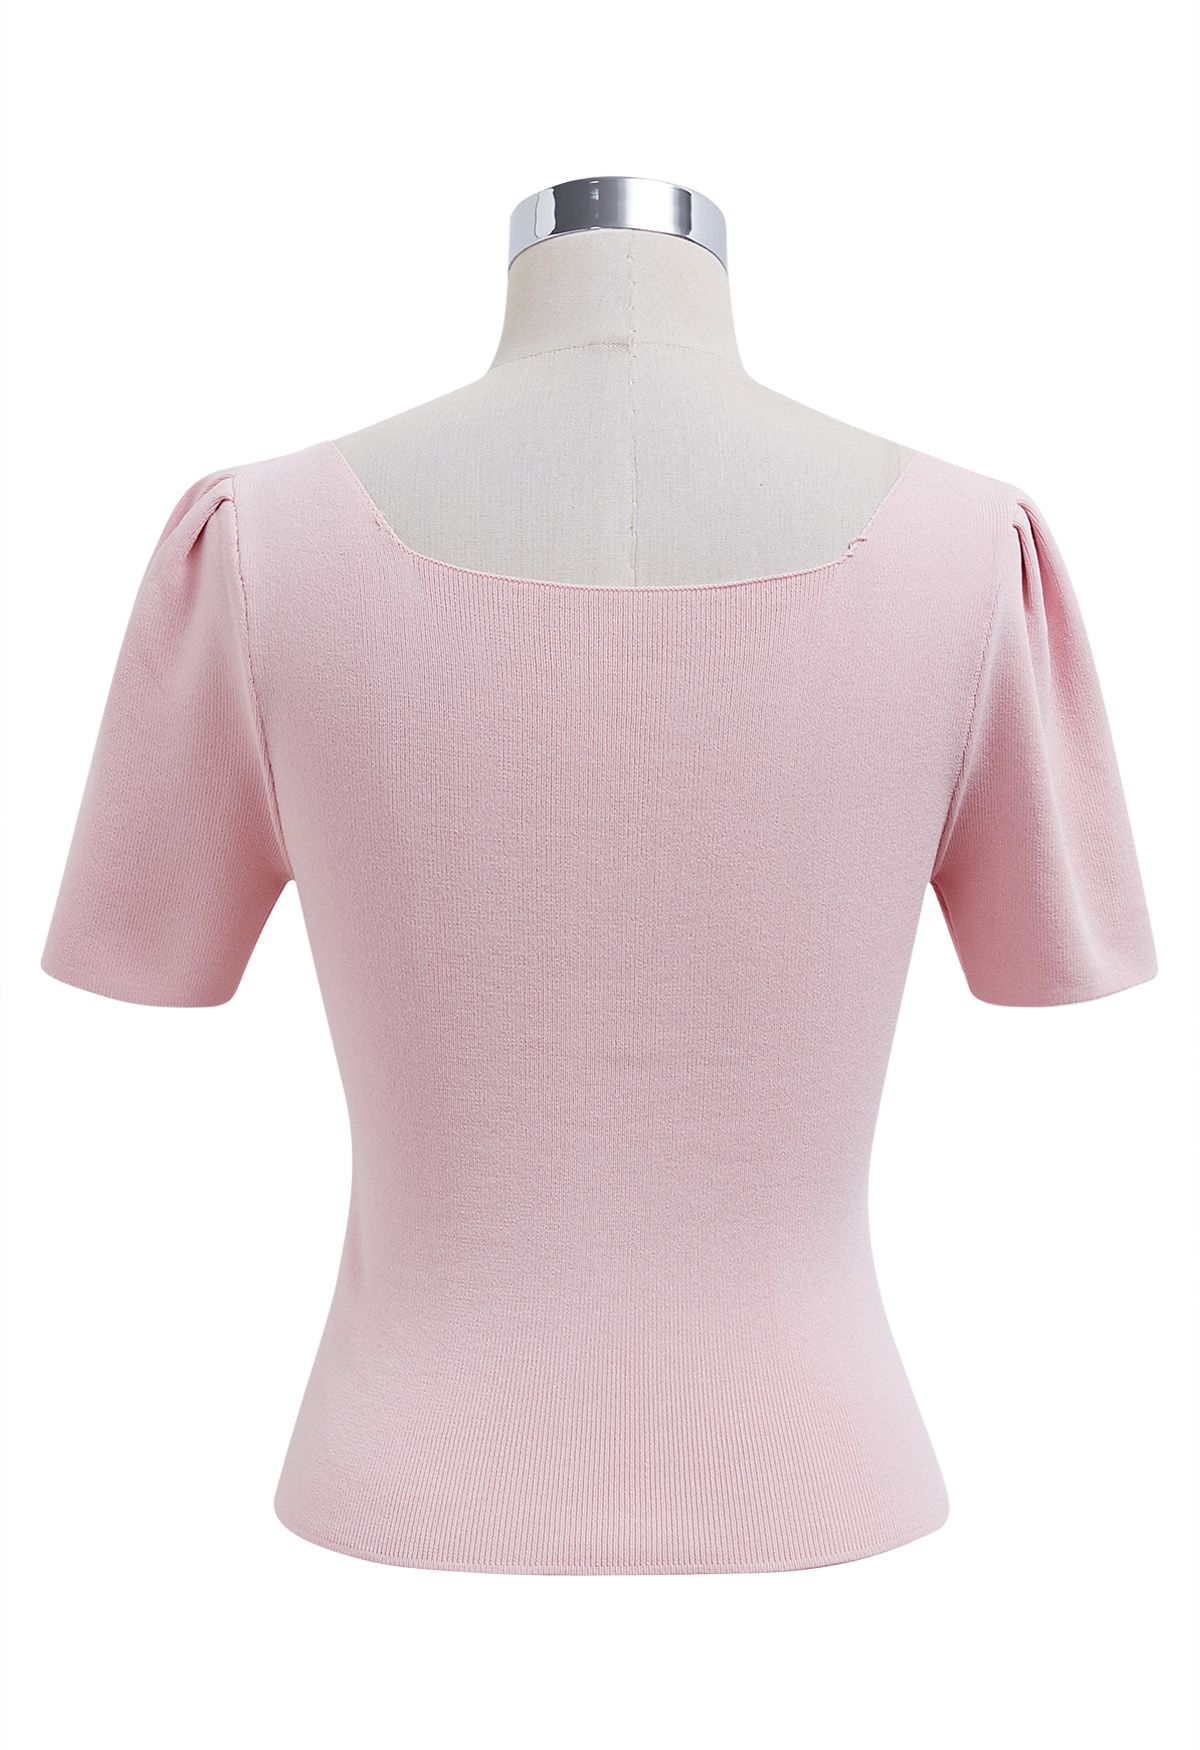 Lace Spliced Square Neckline Knit Top in Pink